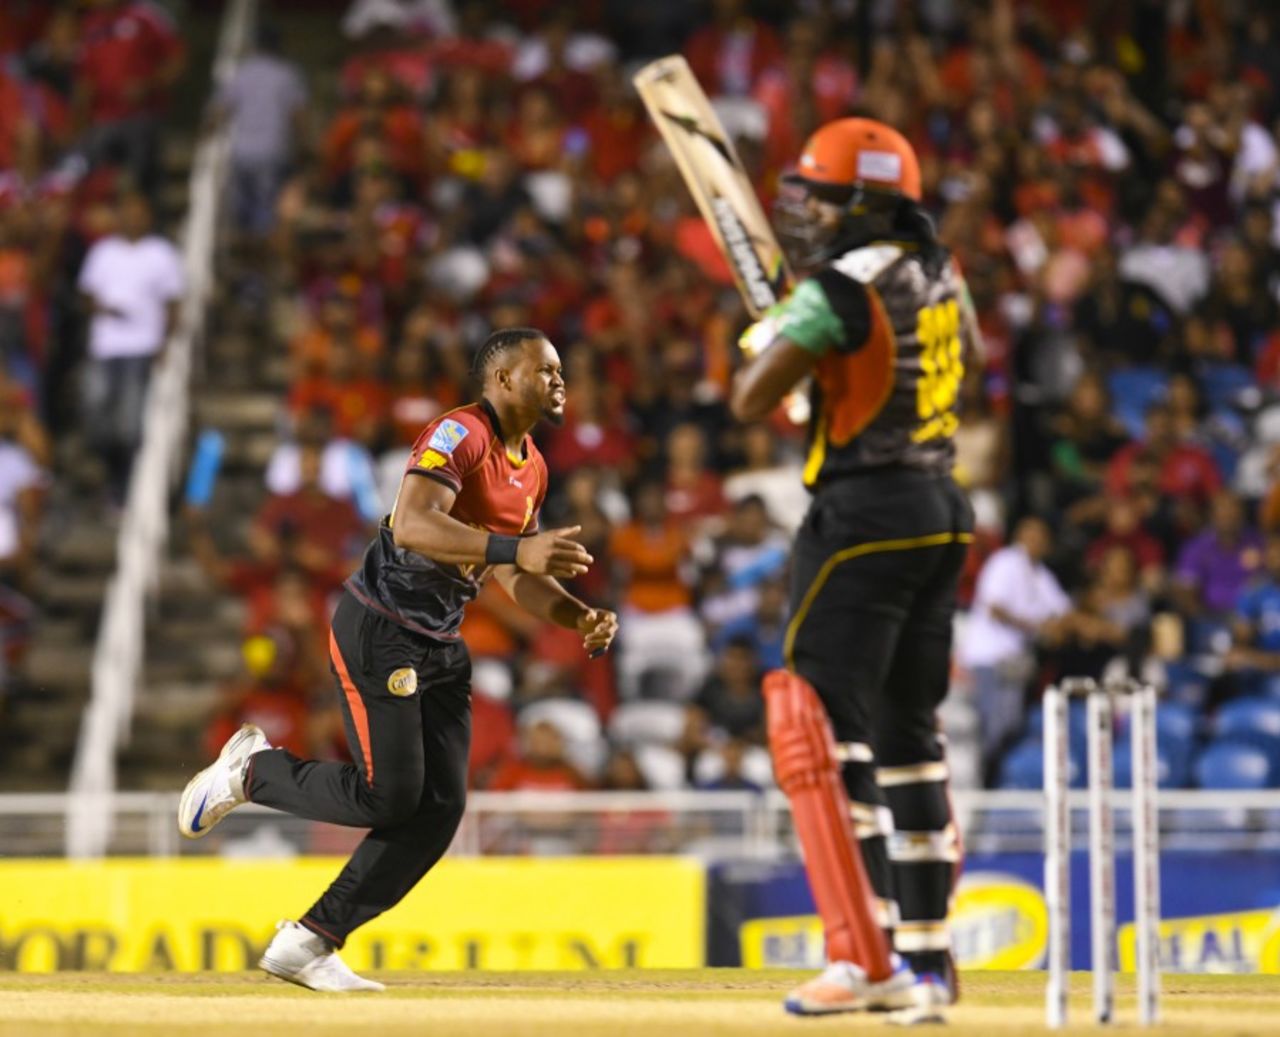 Javon Searles had Chris Gayle caught with his first ball, Trinbago Knight Riders v St Kitts and Nevis Patriots, CPL 2017, final, Tarouba, September 9, 2017